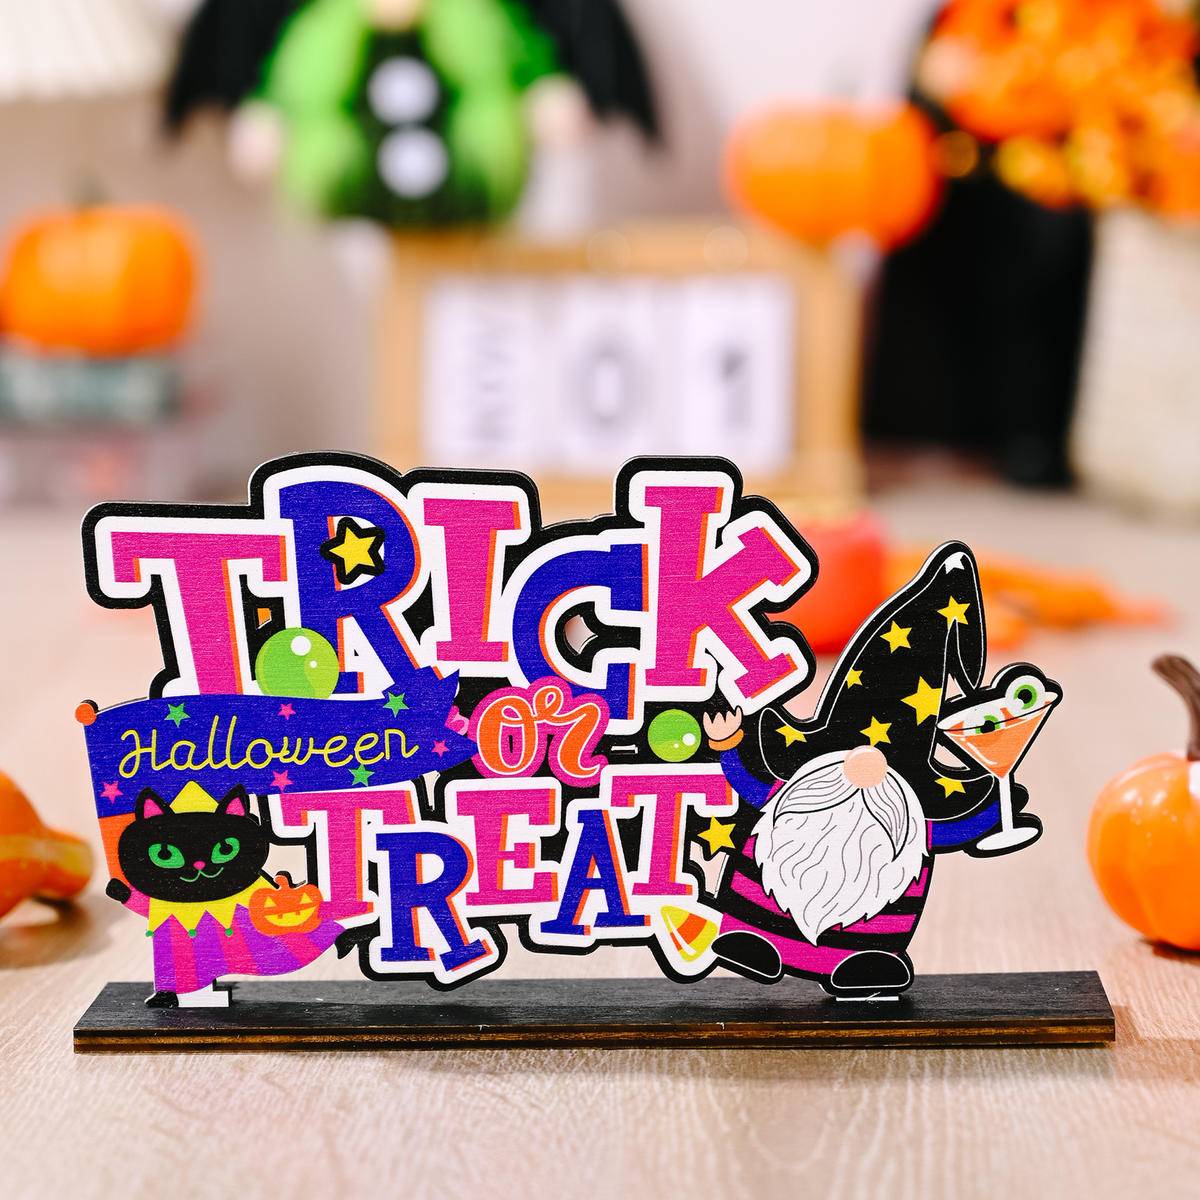 Colorful Halloween Wooden Decoration Ornaments